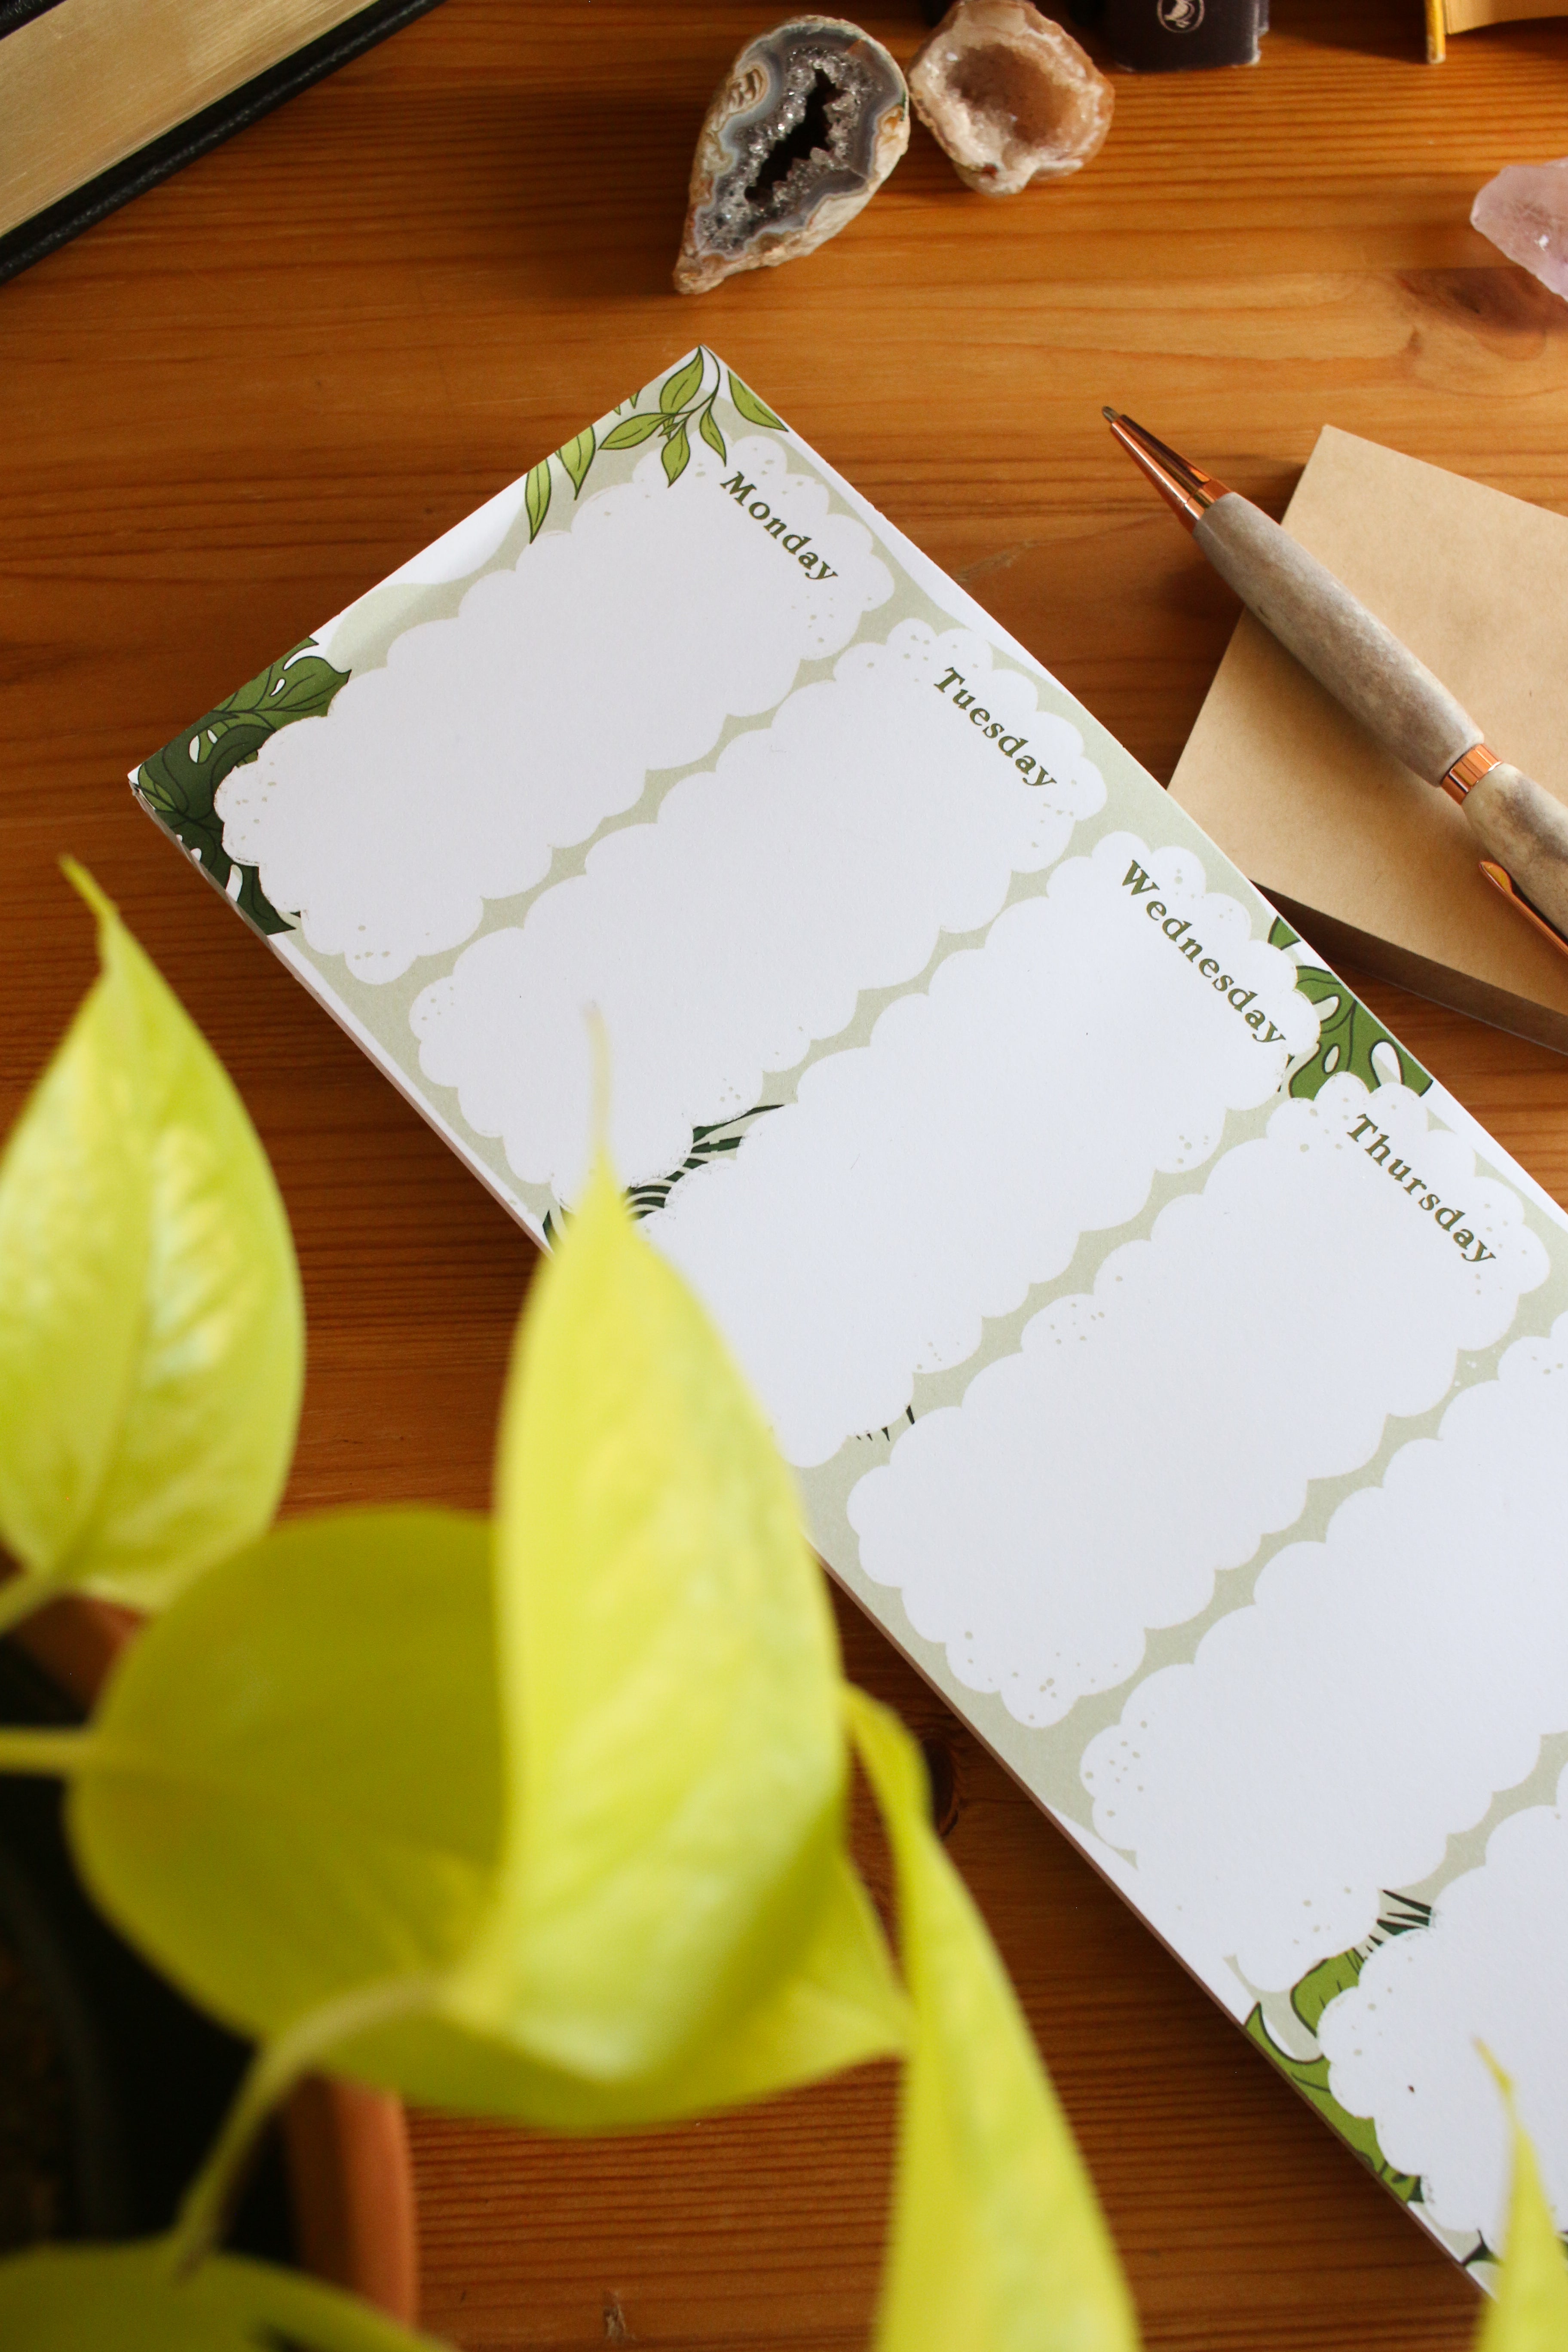 Tropical Weekly Notepad Planner